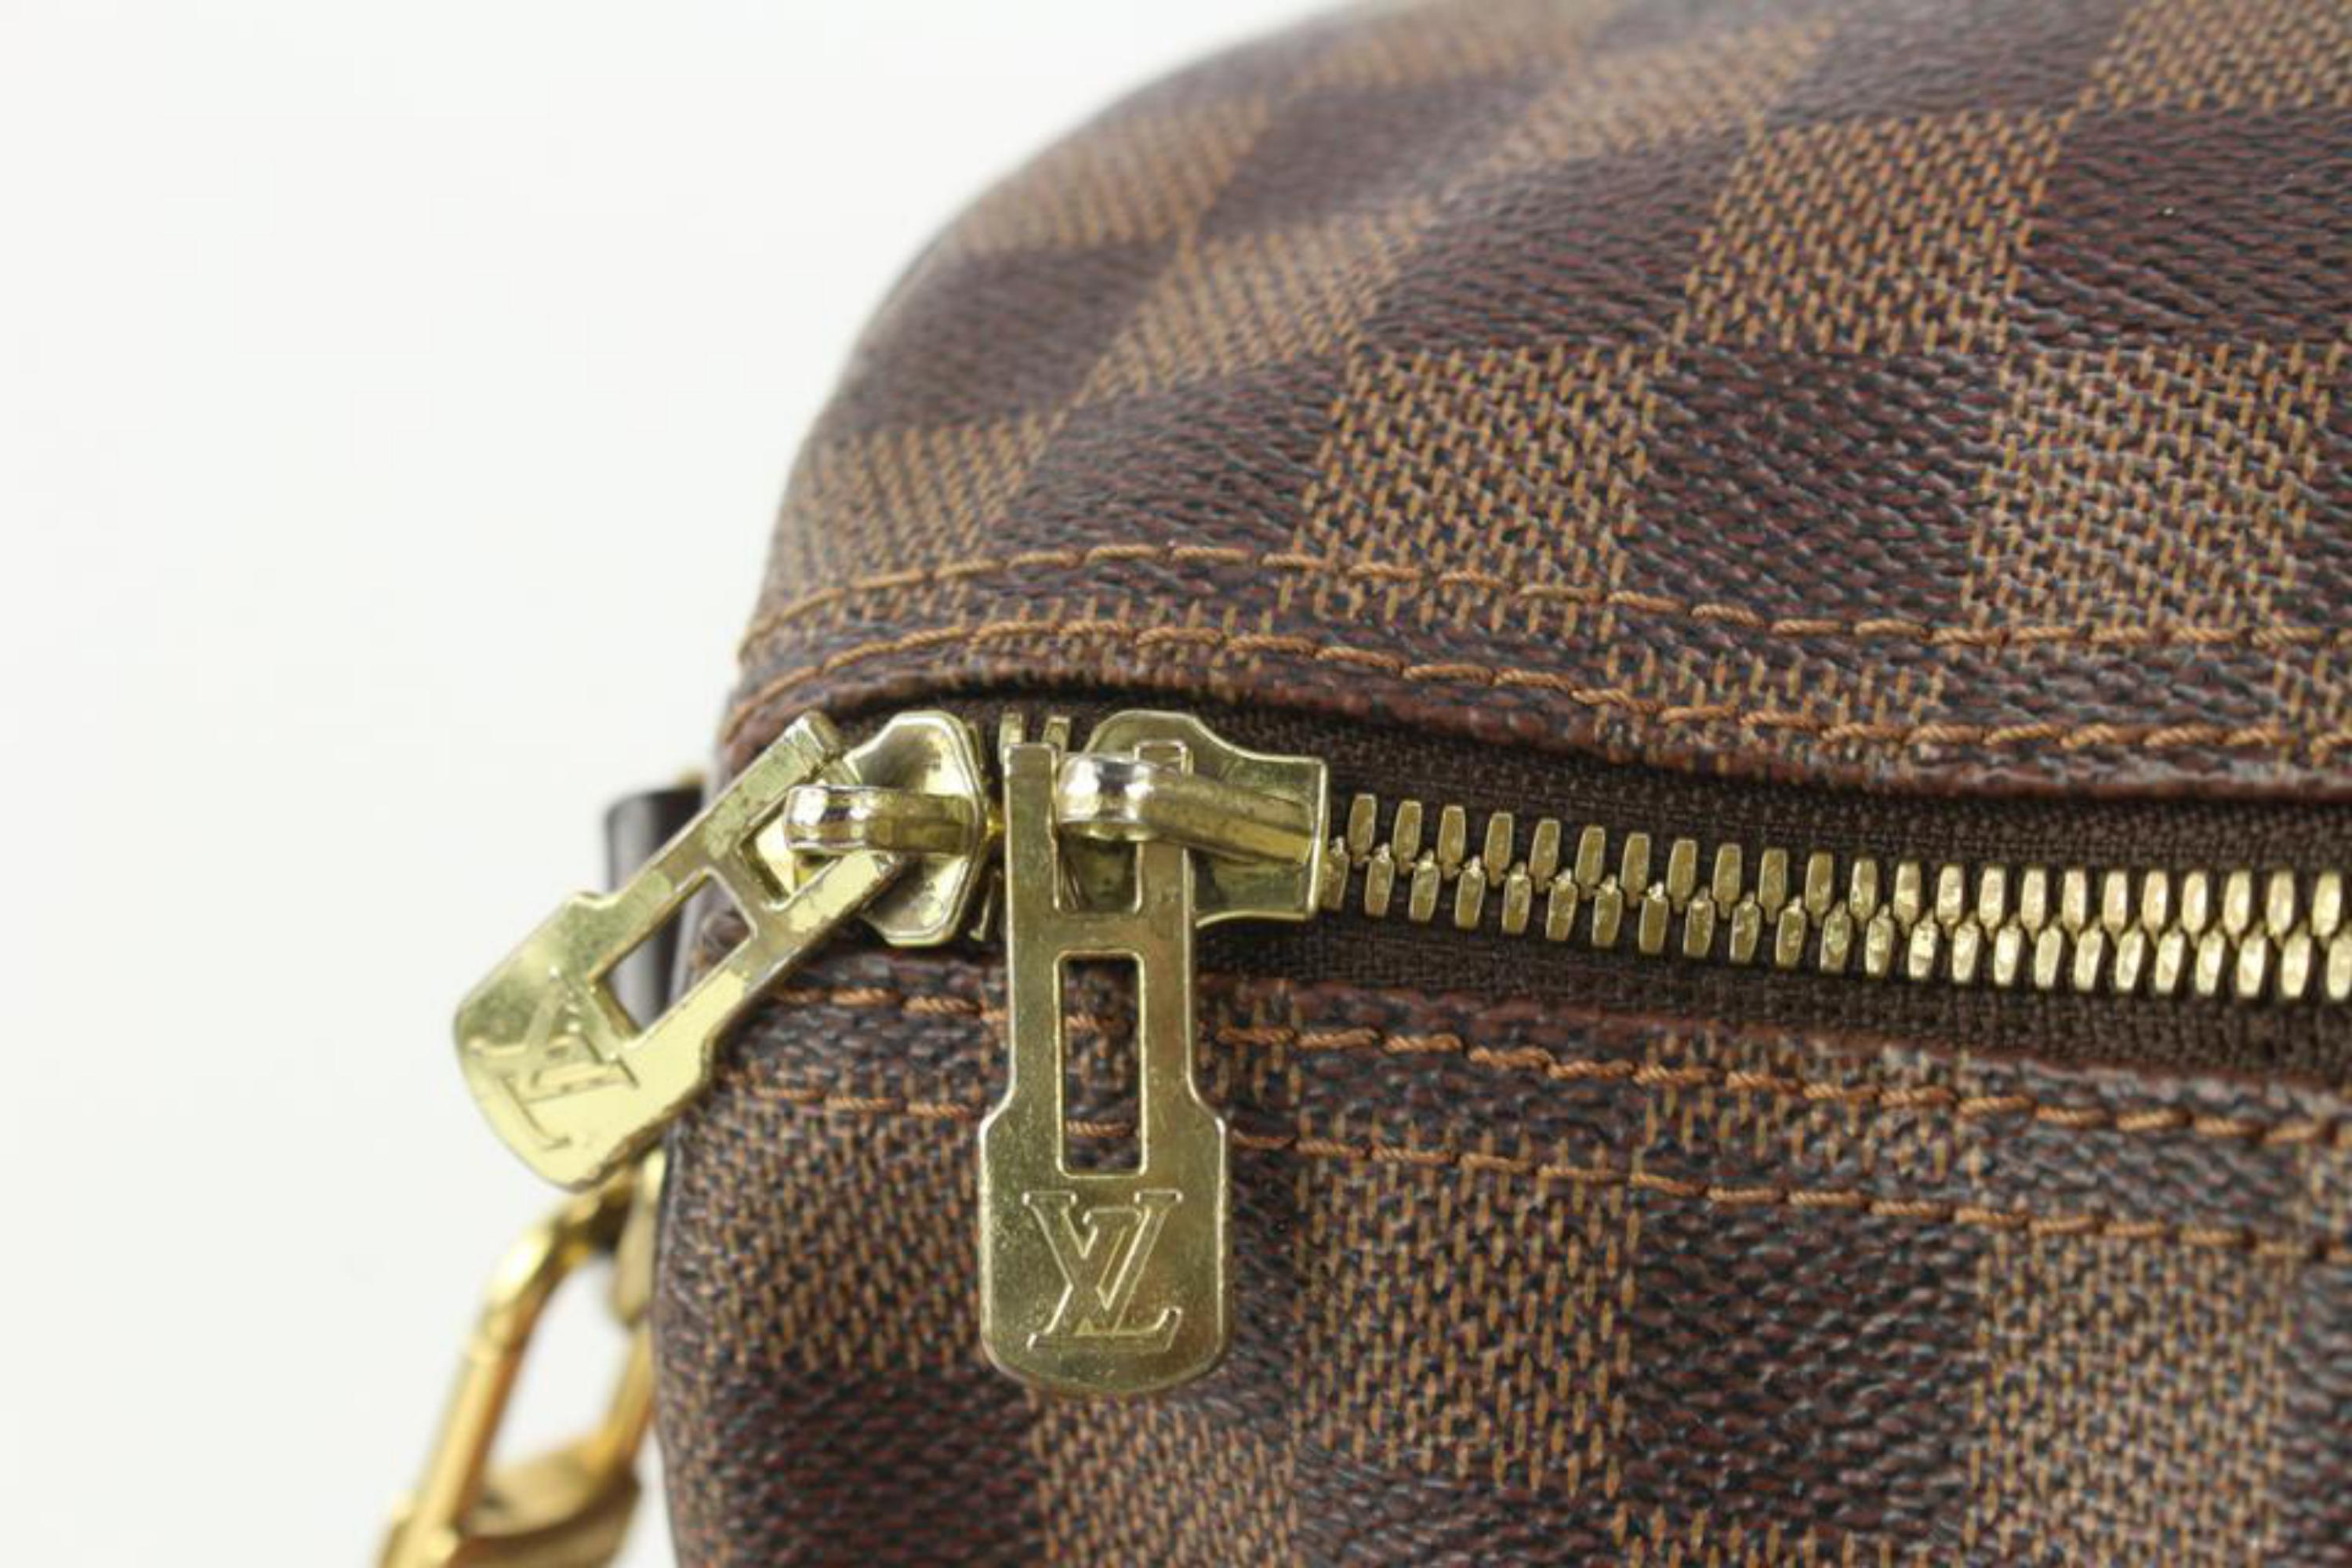 Louis Vuitton Damier Ebene Speedy Bandouliere 35 with Strap 112lv21 For Sale 1